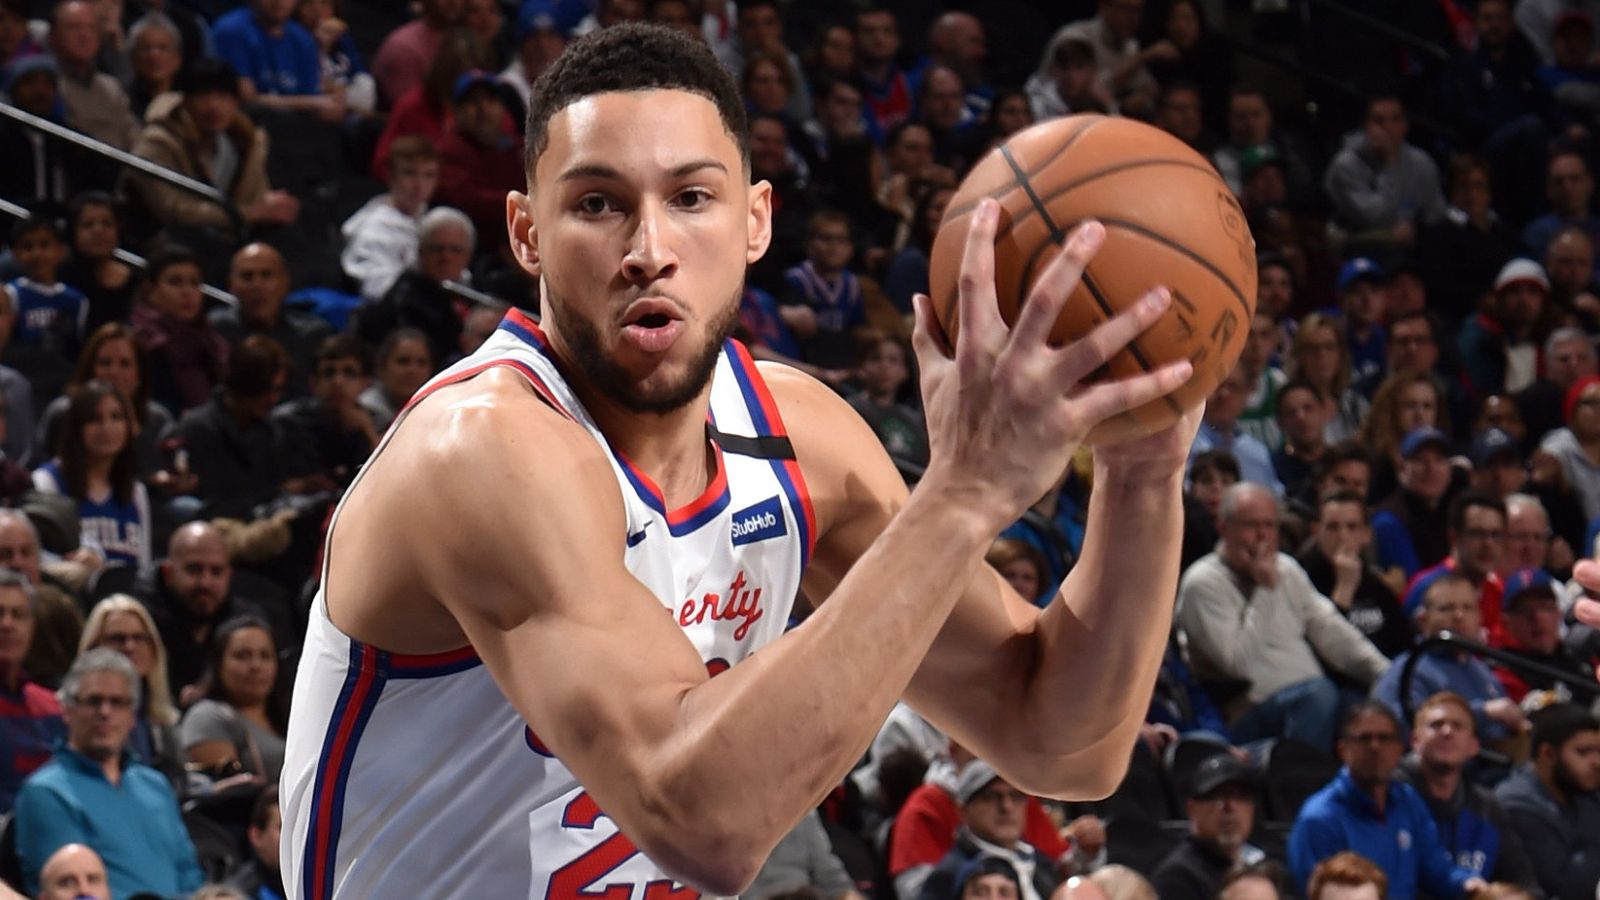 Sixers Ben Simmons still brings hopes to these Philadelphia fans